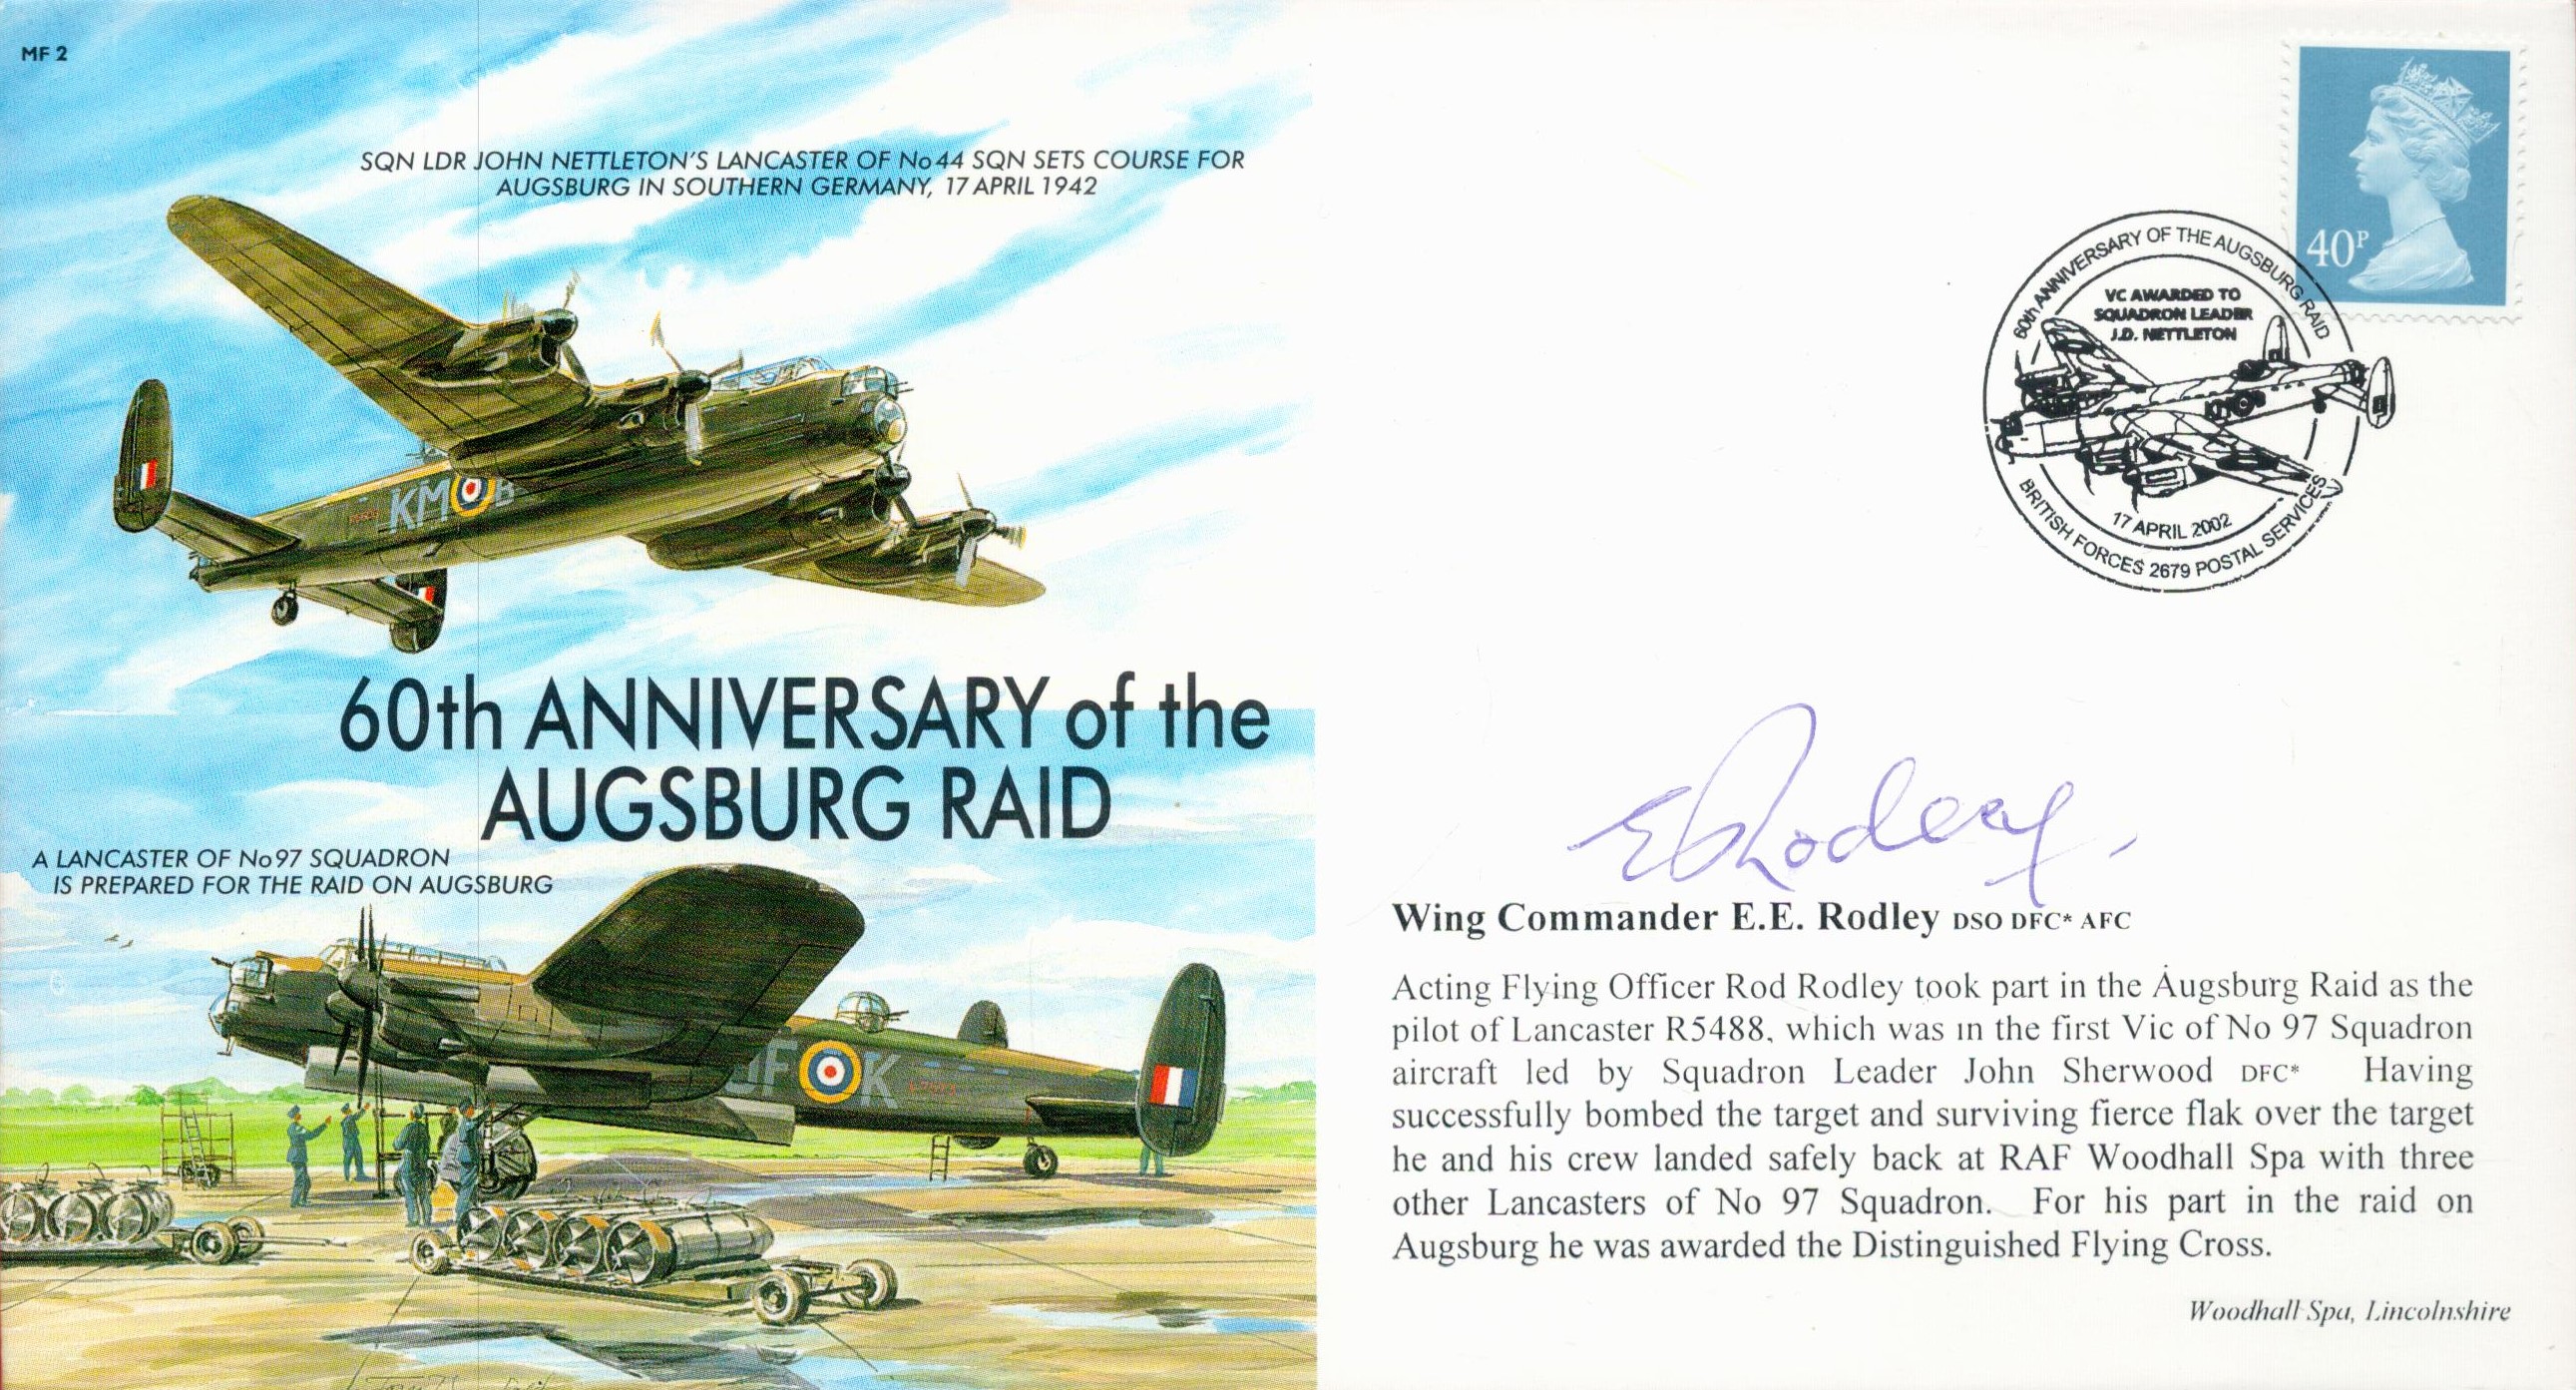 WW2 Wg Cdr EE Rodley DSO DFC AFC Signed 60th anniversary of the Augsburg Raid MF2 FDC. British stamp